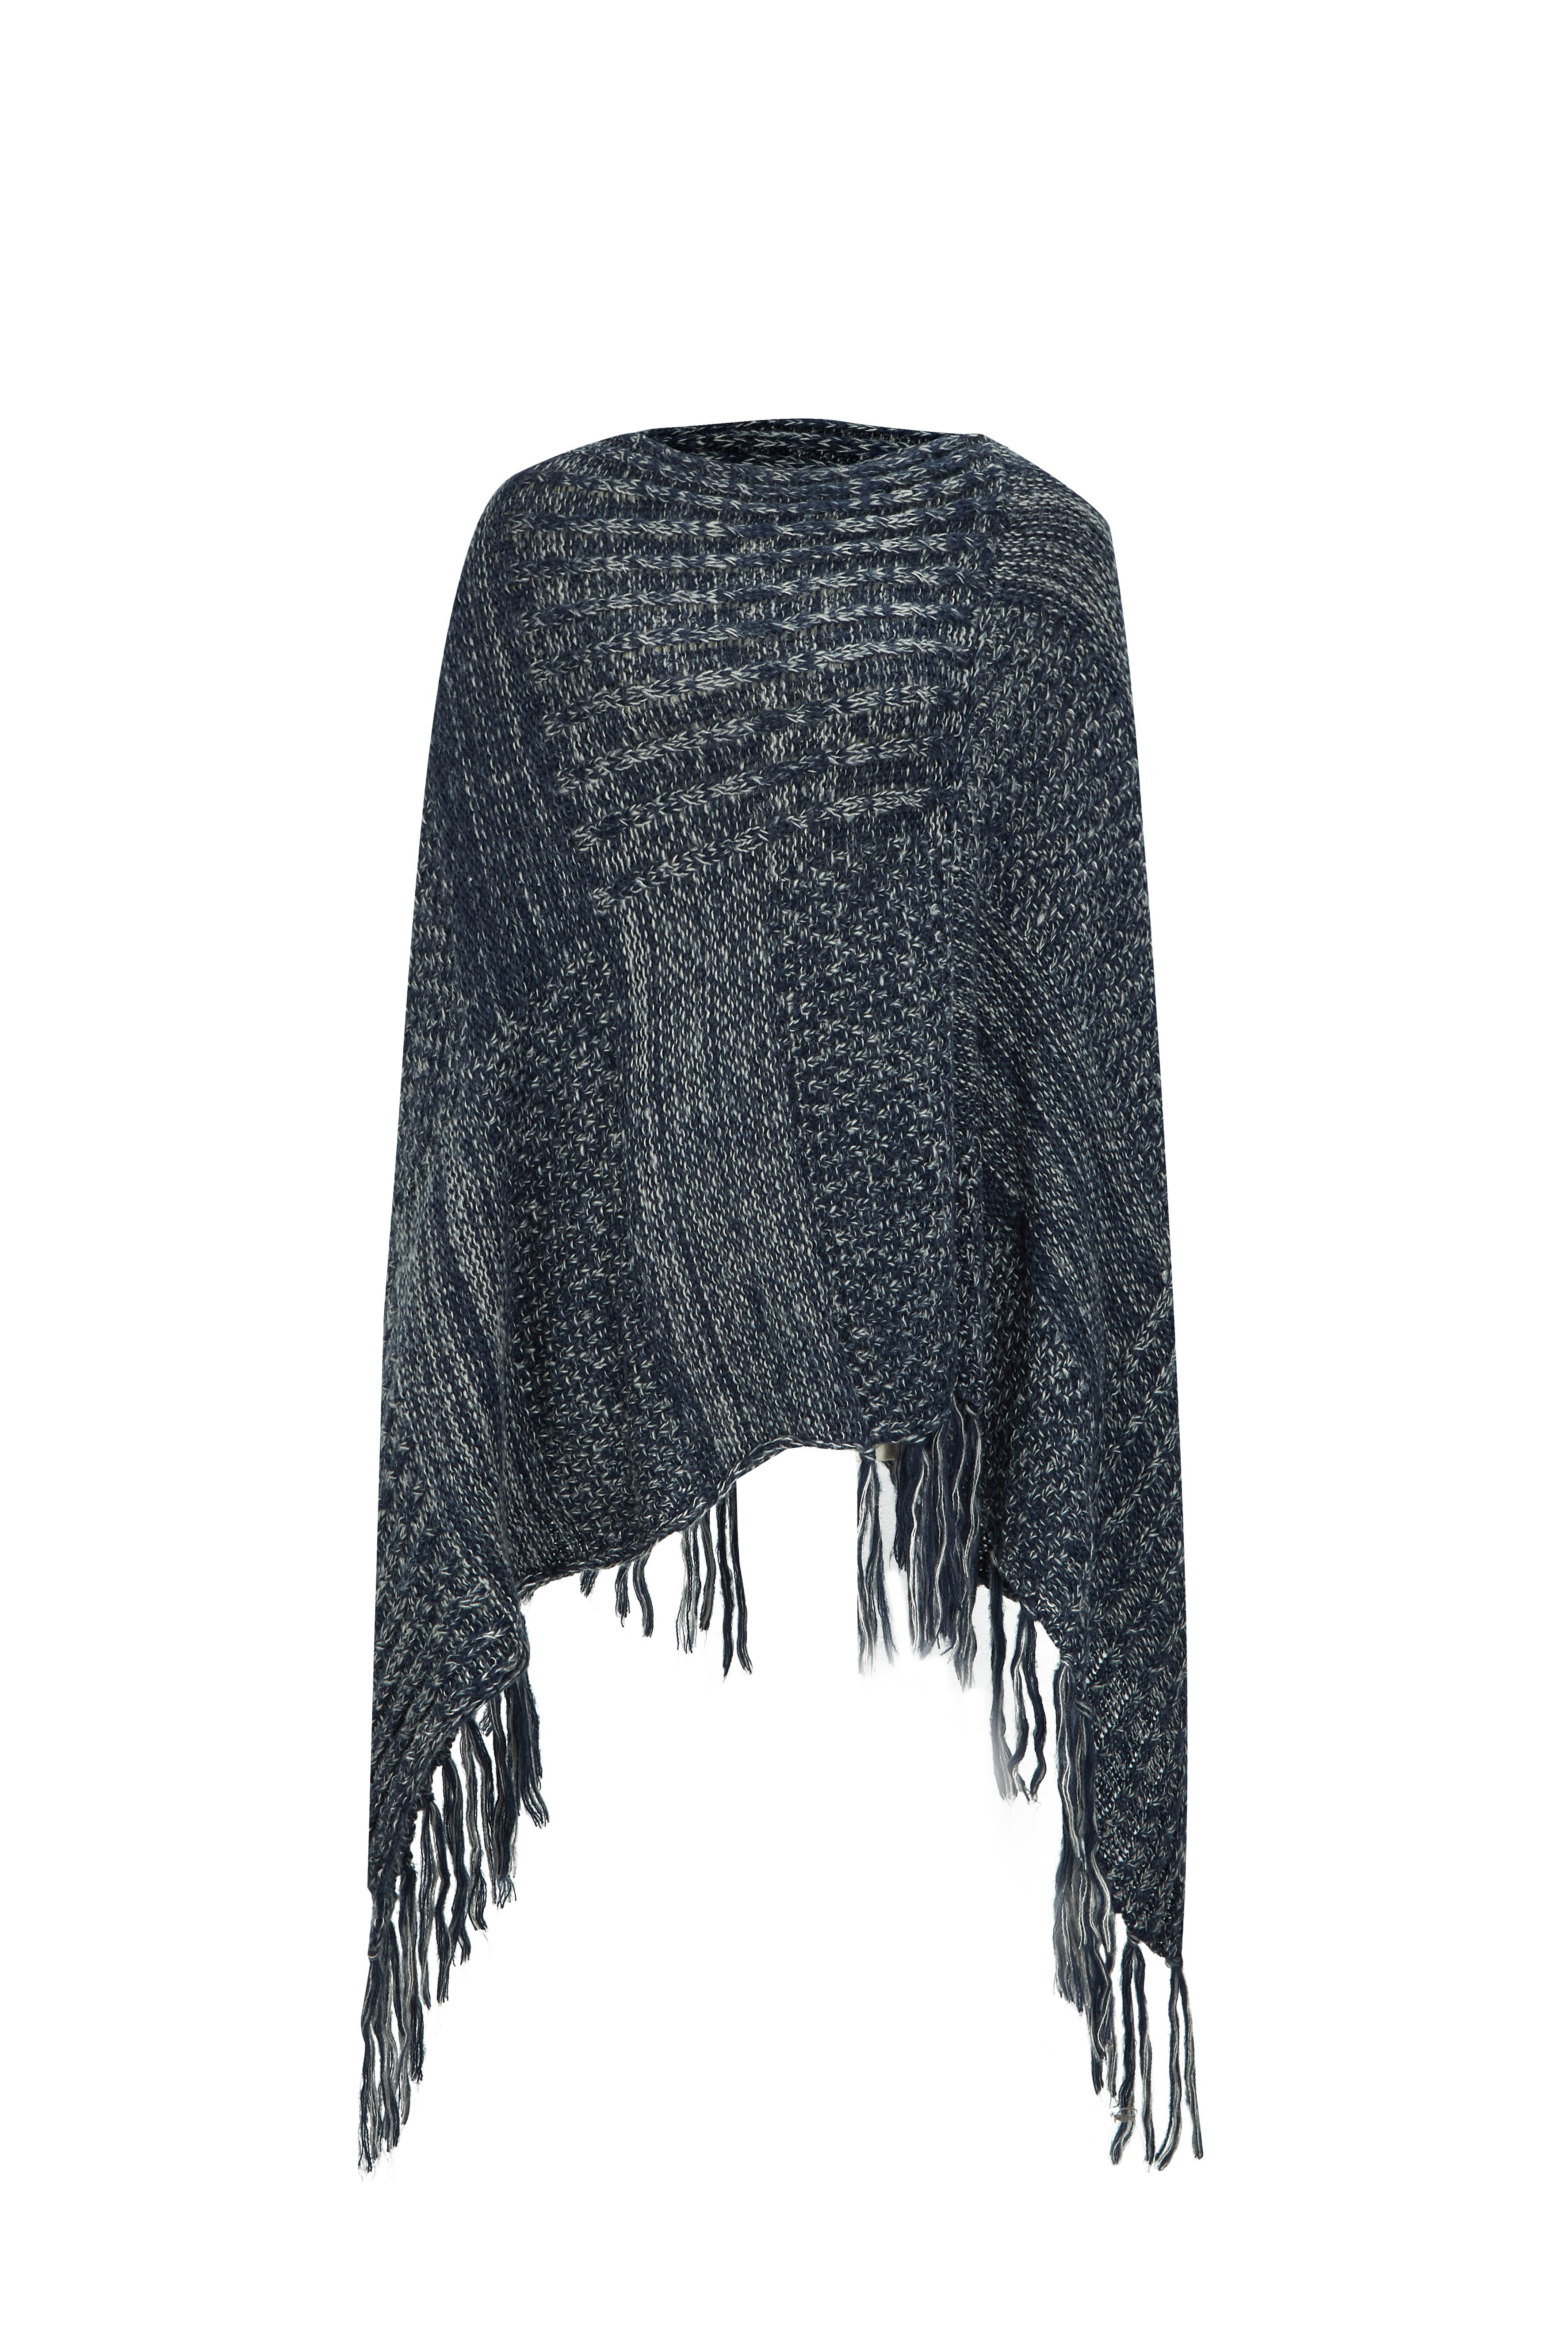 Women's Bohemian Shawl Poncho V-neck Knitted Sweater Cape